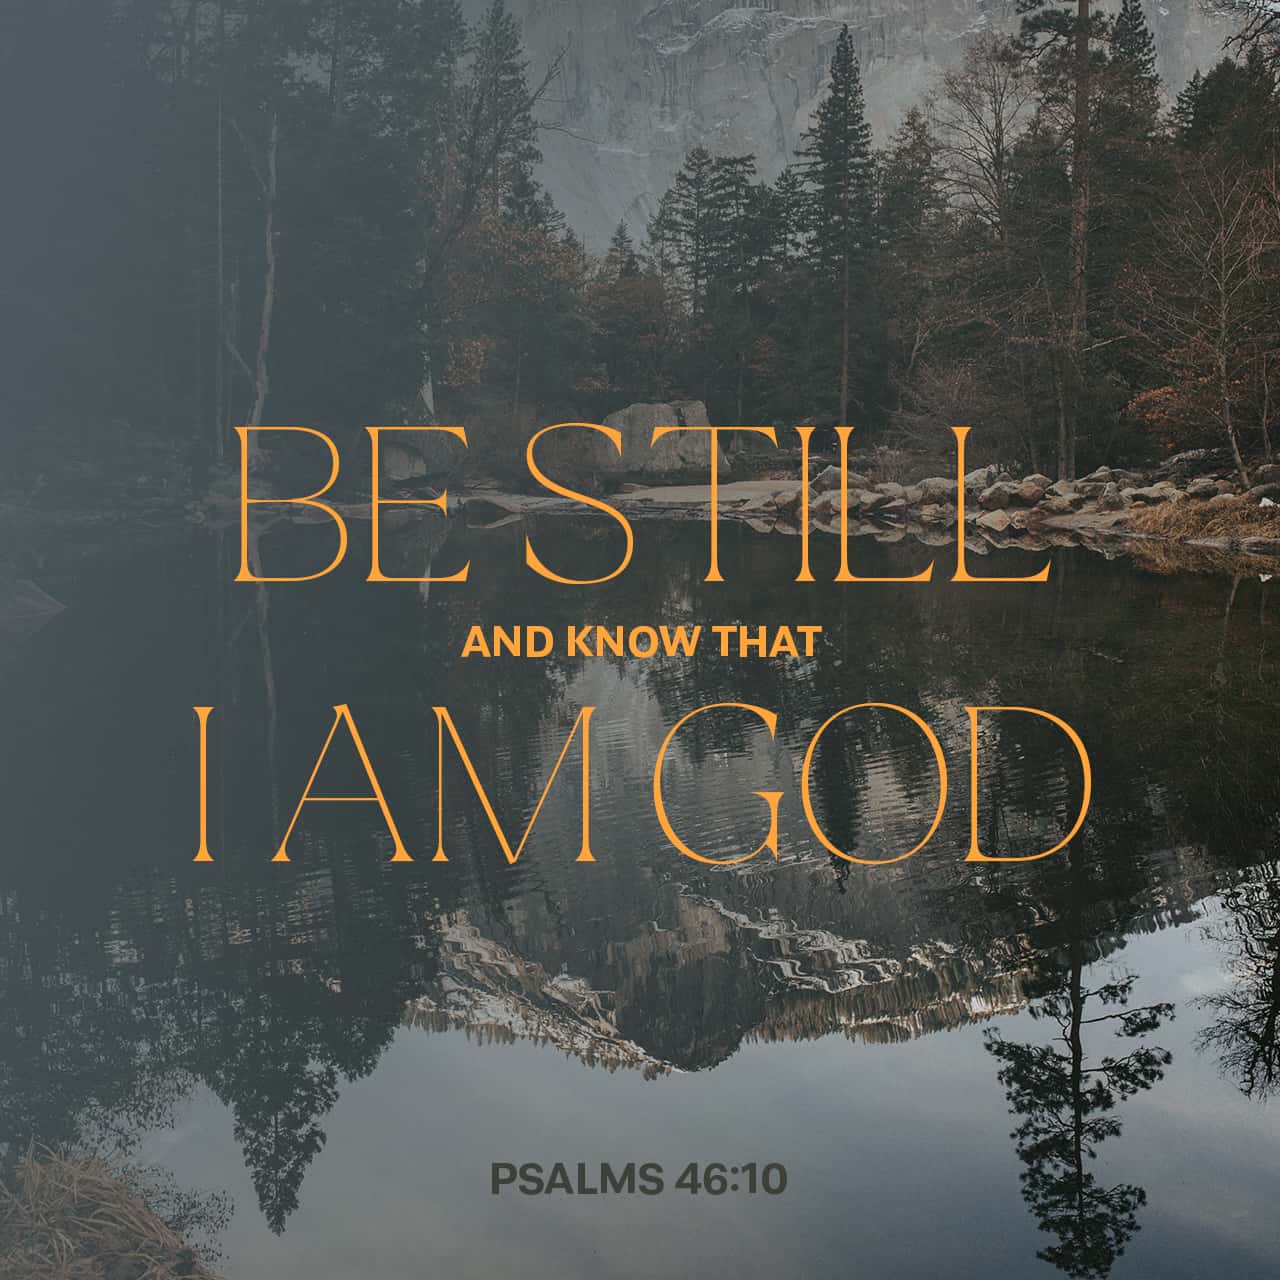 Bible Verse of the Day - day 308 - image 52890 (Psalms 46:10)